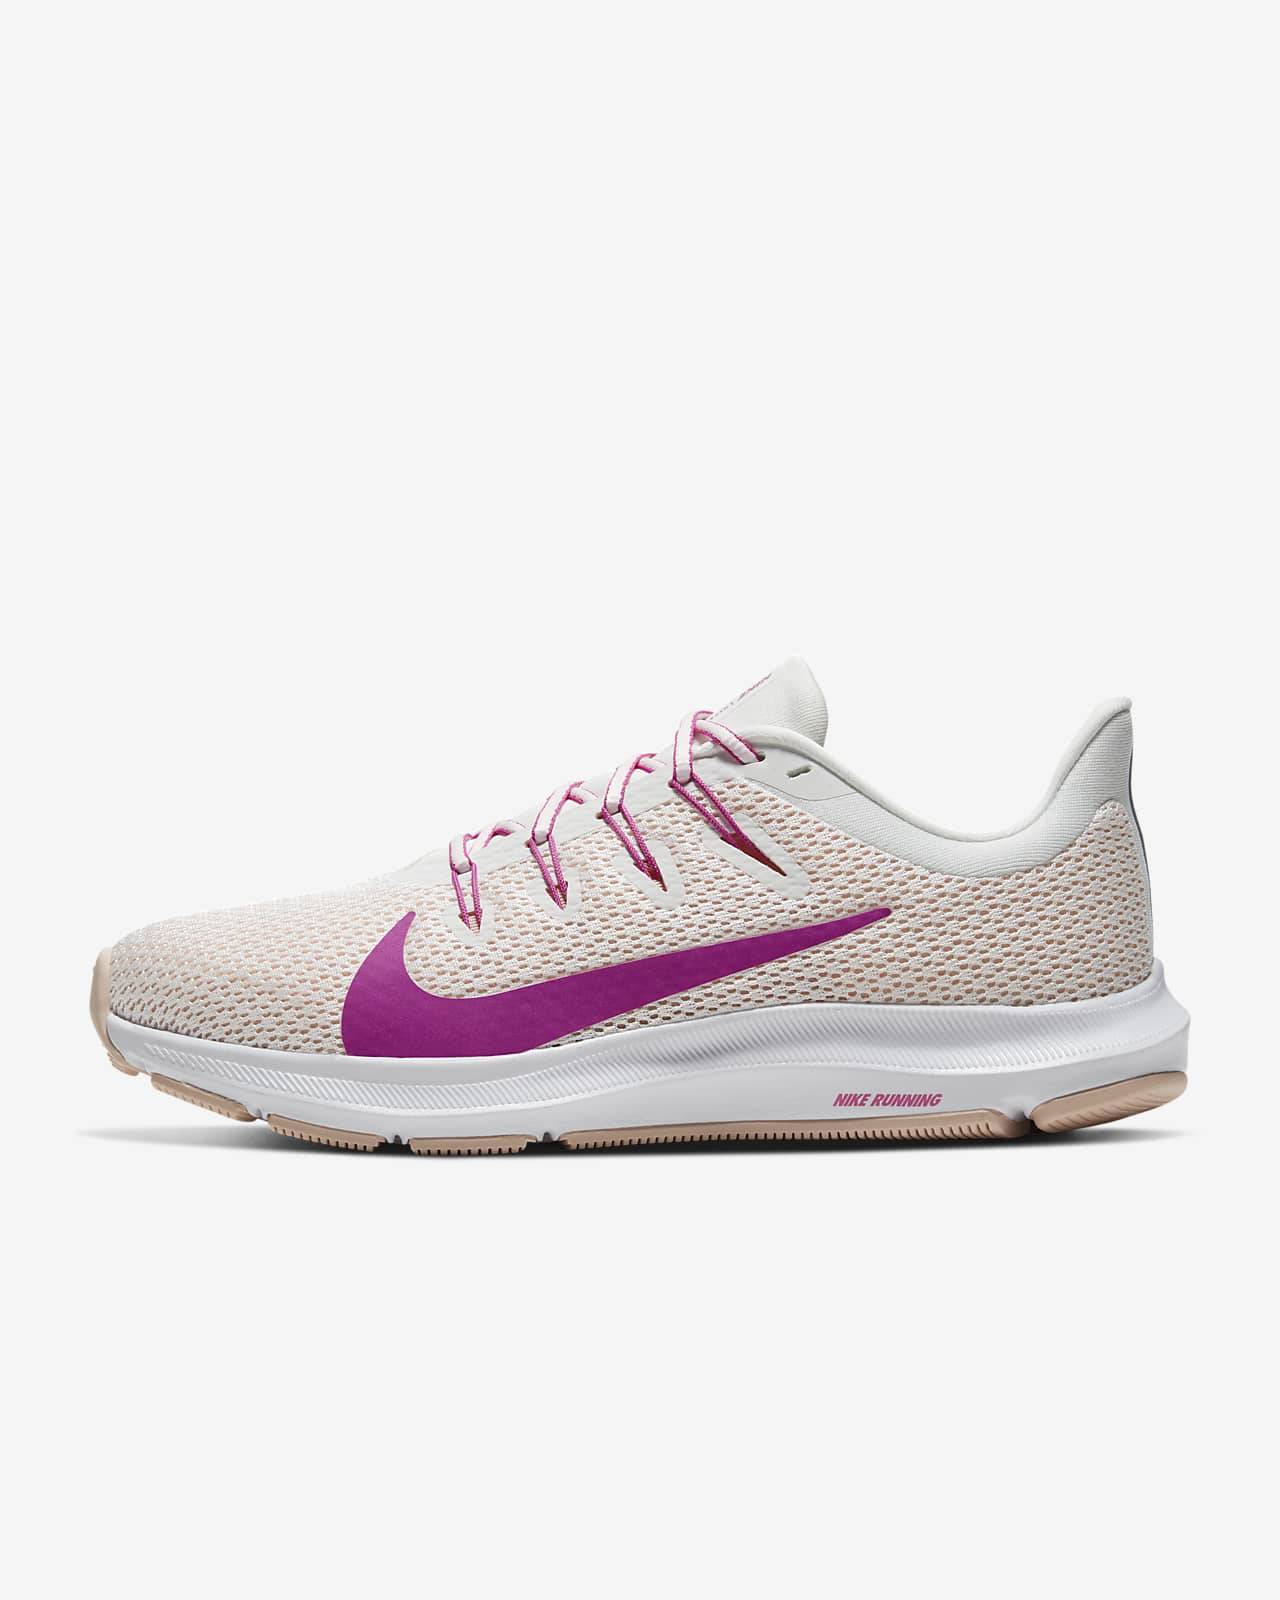 nike quest 2 women's running shoes pink